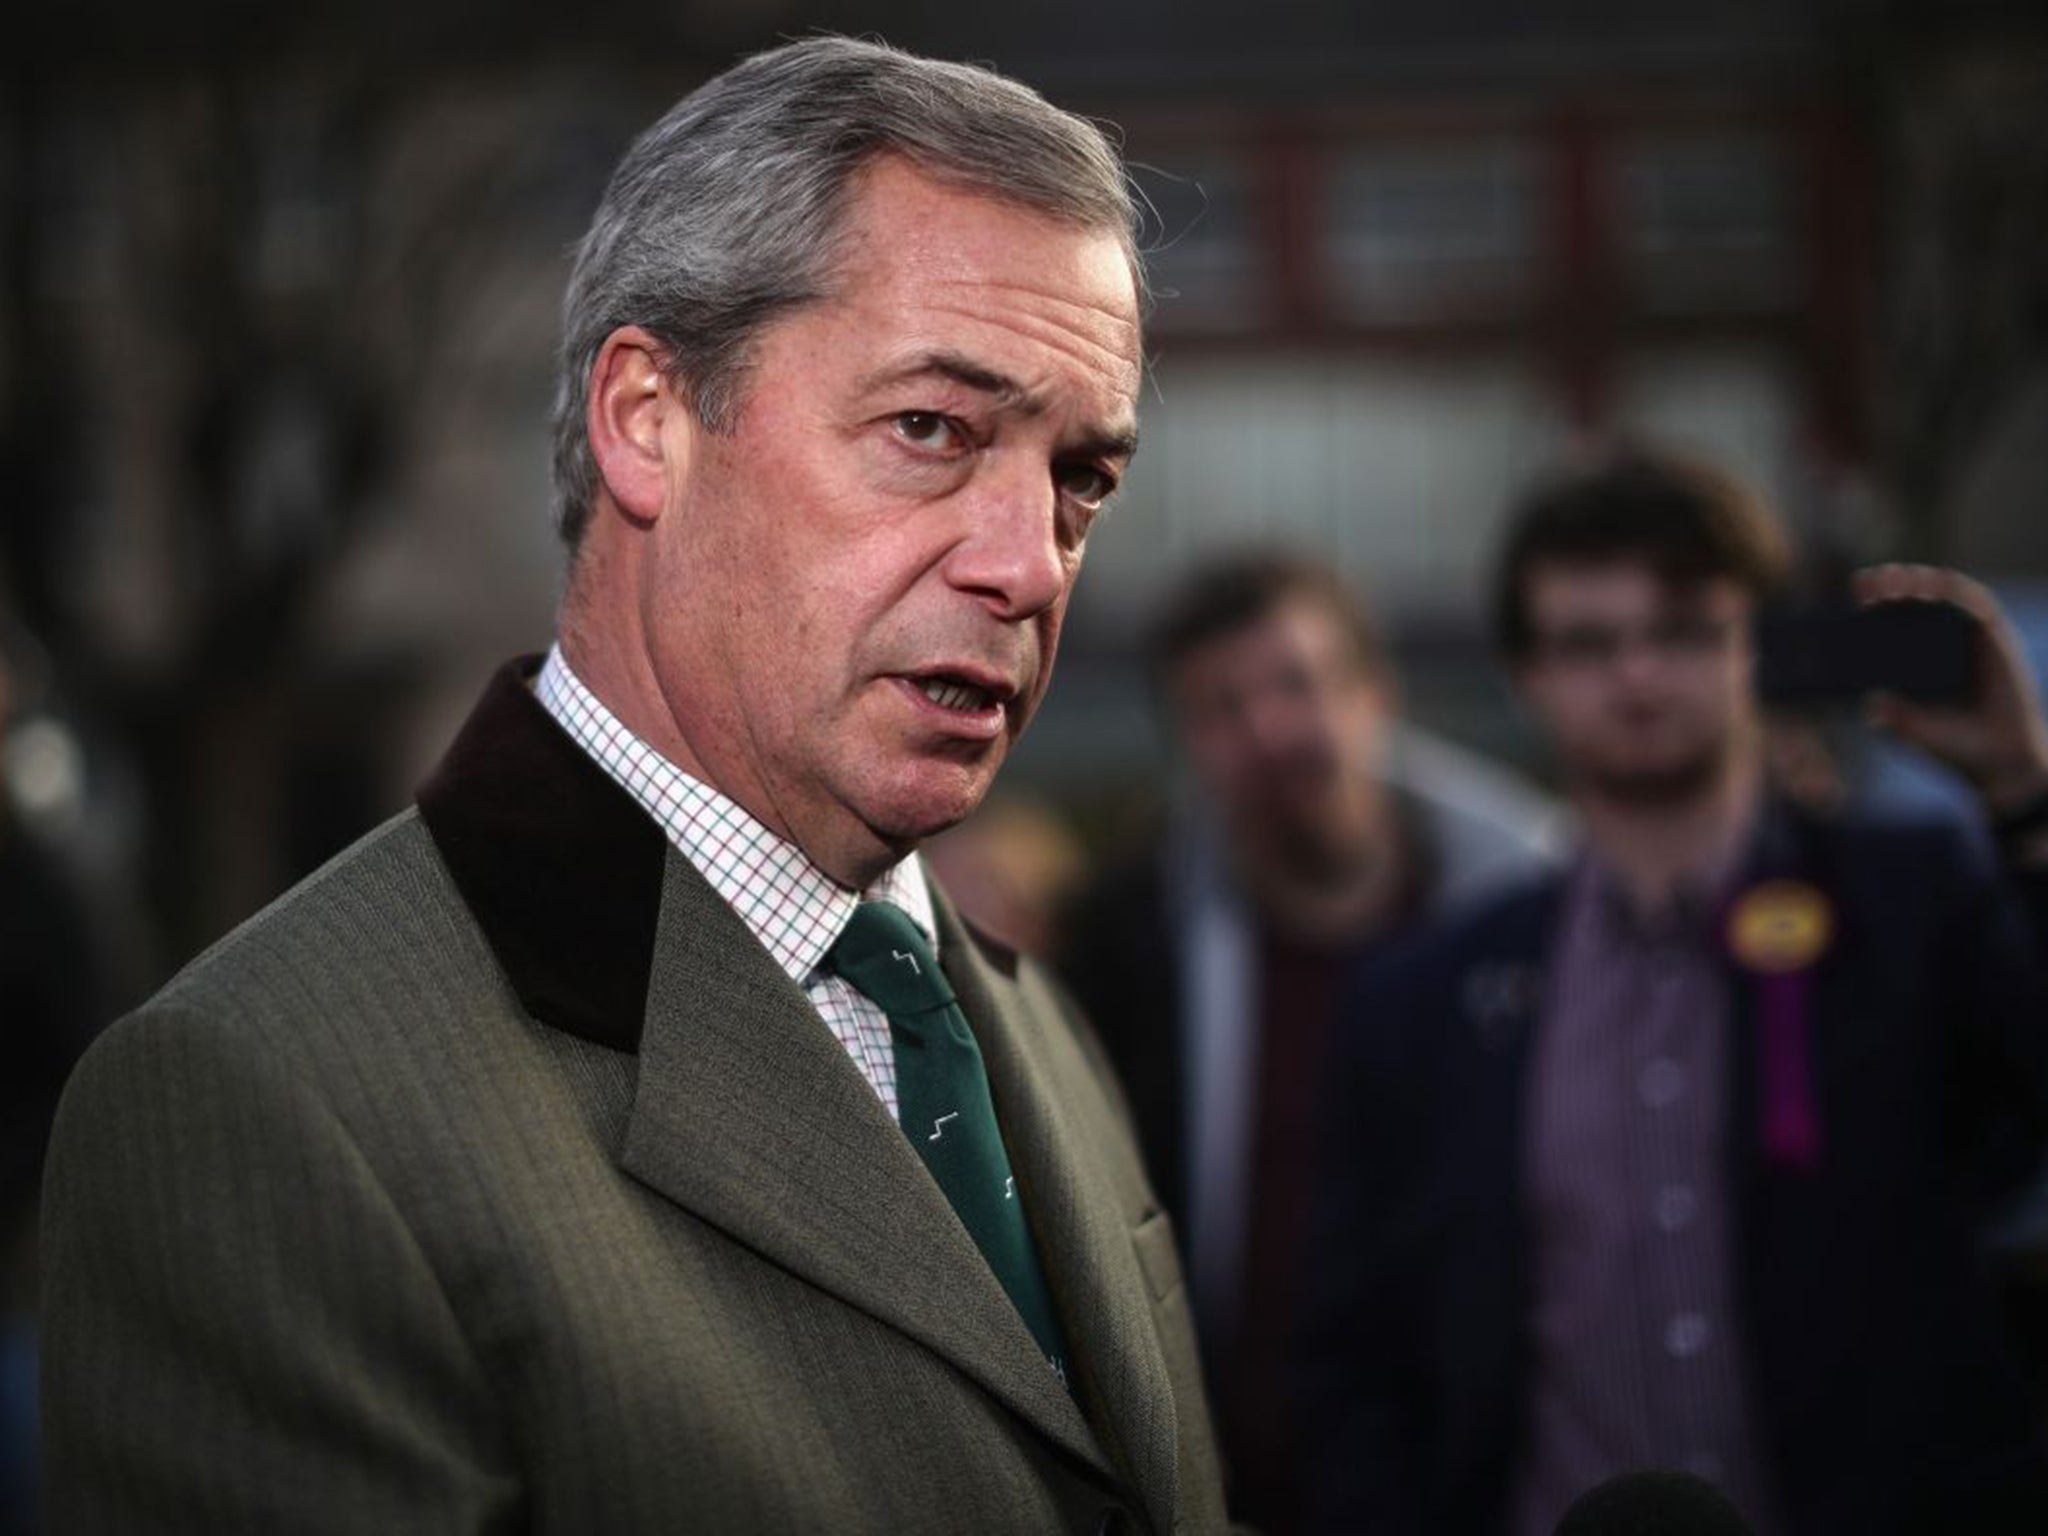 Nigel Farage, who has stood for Parliament seven times and lost on each occasion